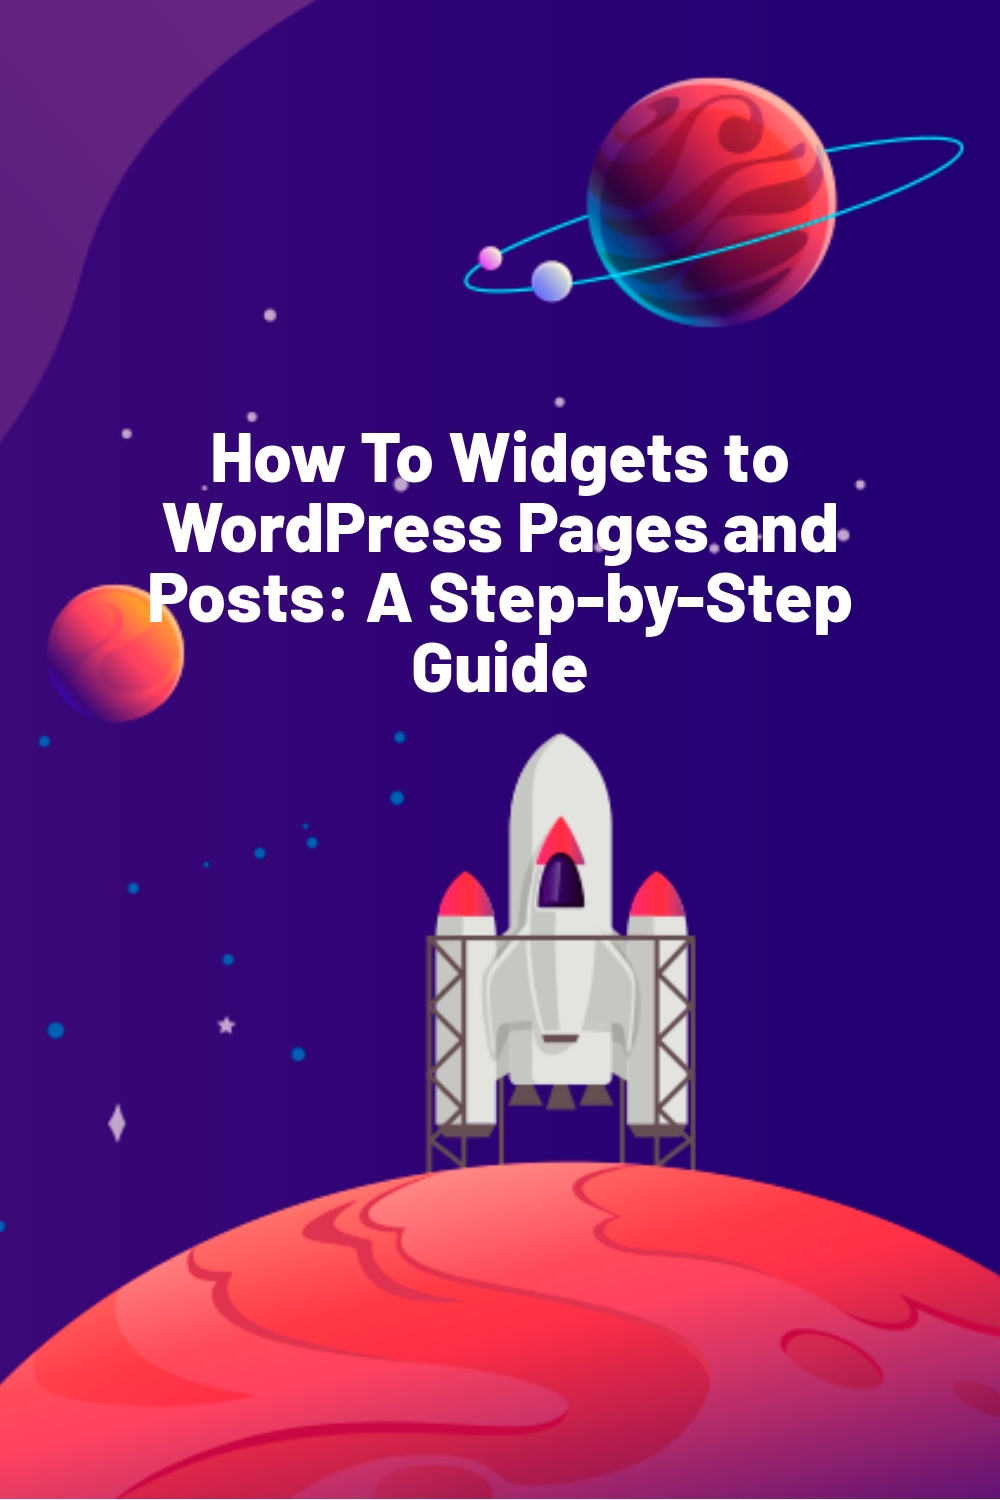 How To Widgets to WordPress Pages and Posts: A Step-by-Step Guide